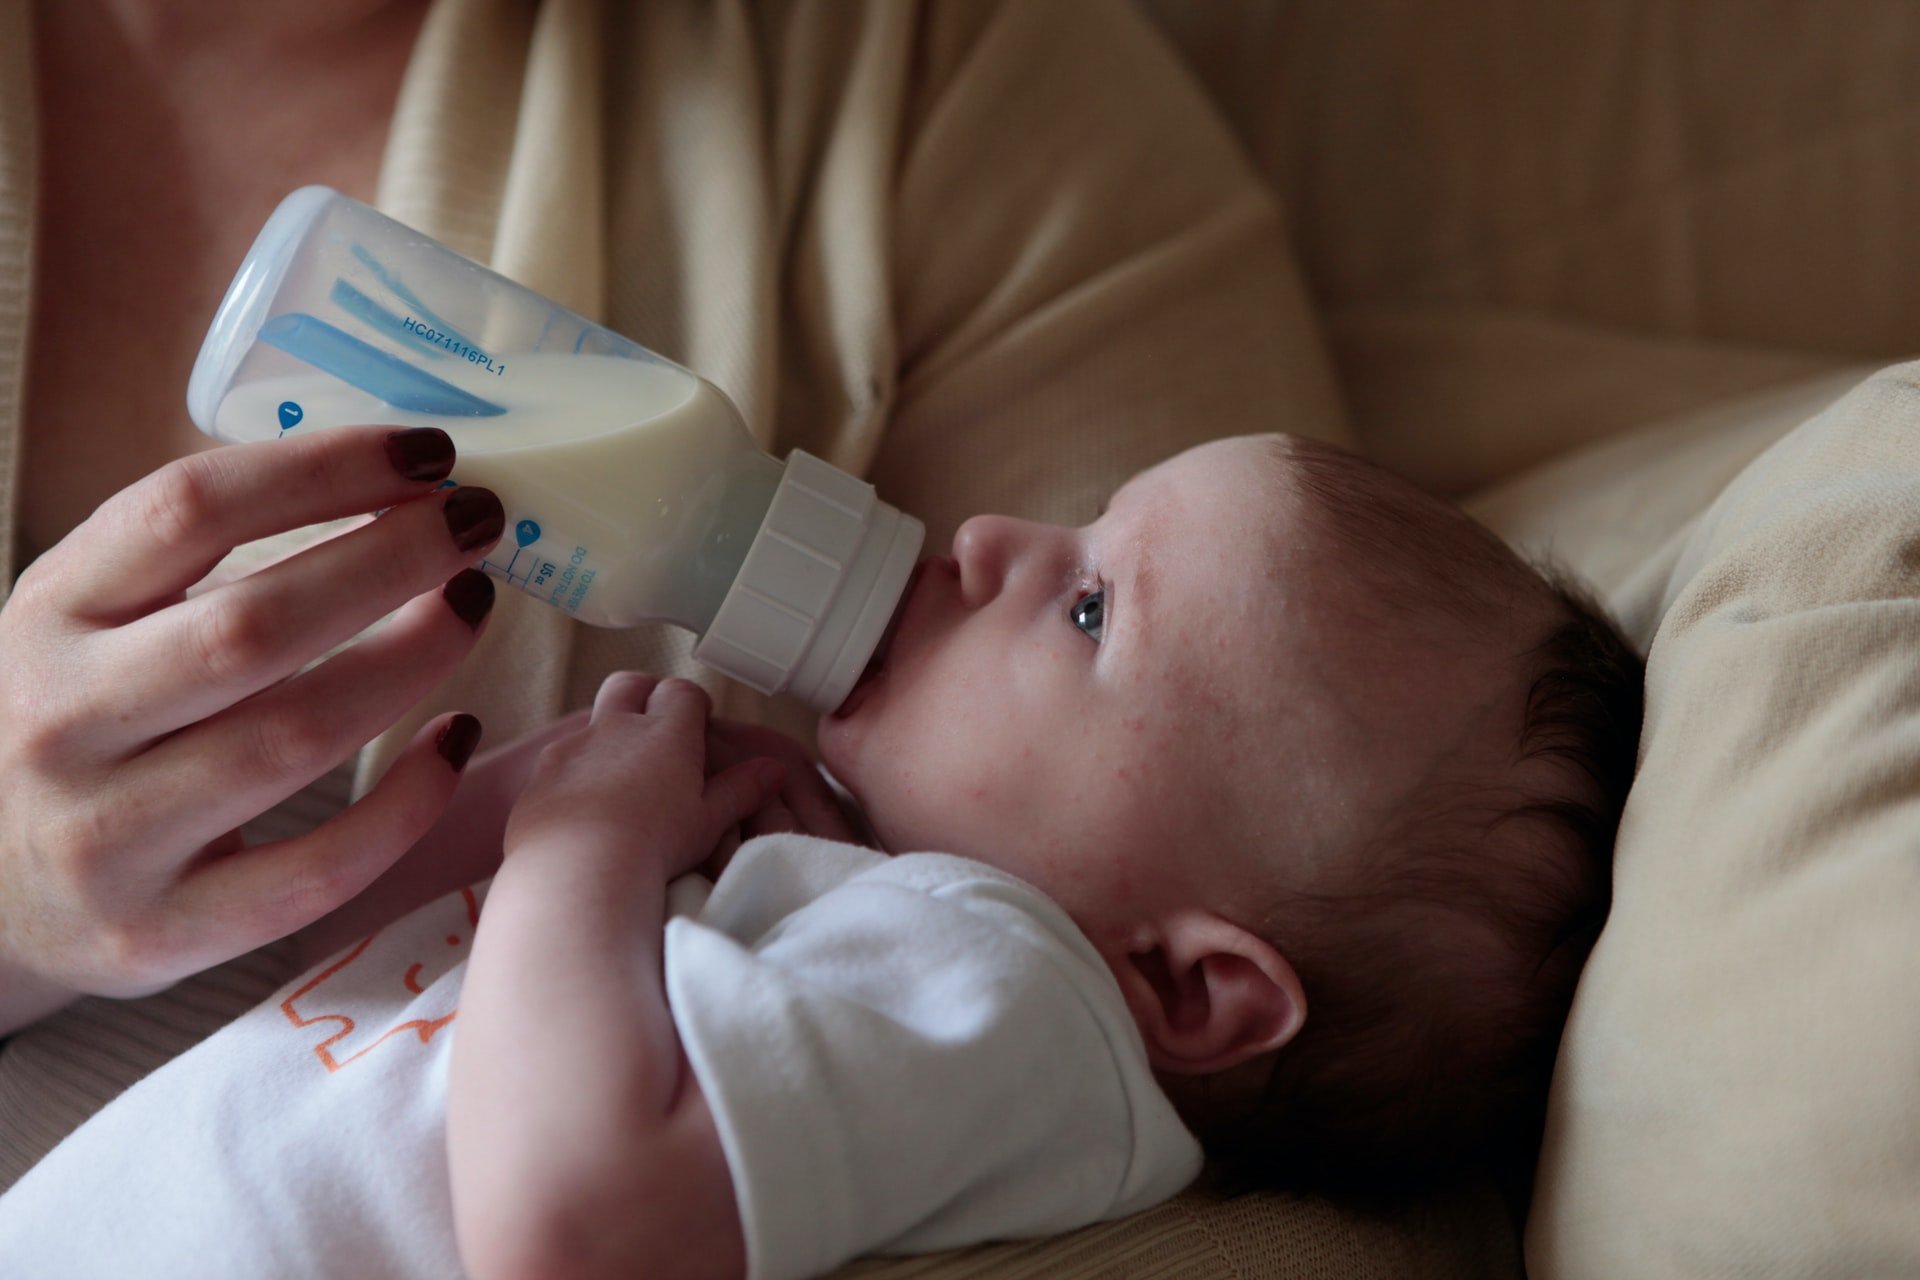 He thought his mother-in-law wasn't giving his daughter formula milk. | Source: Unsplash